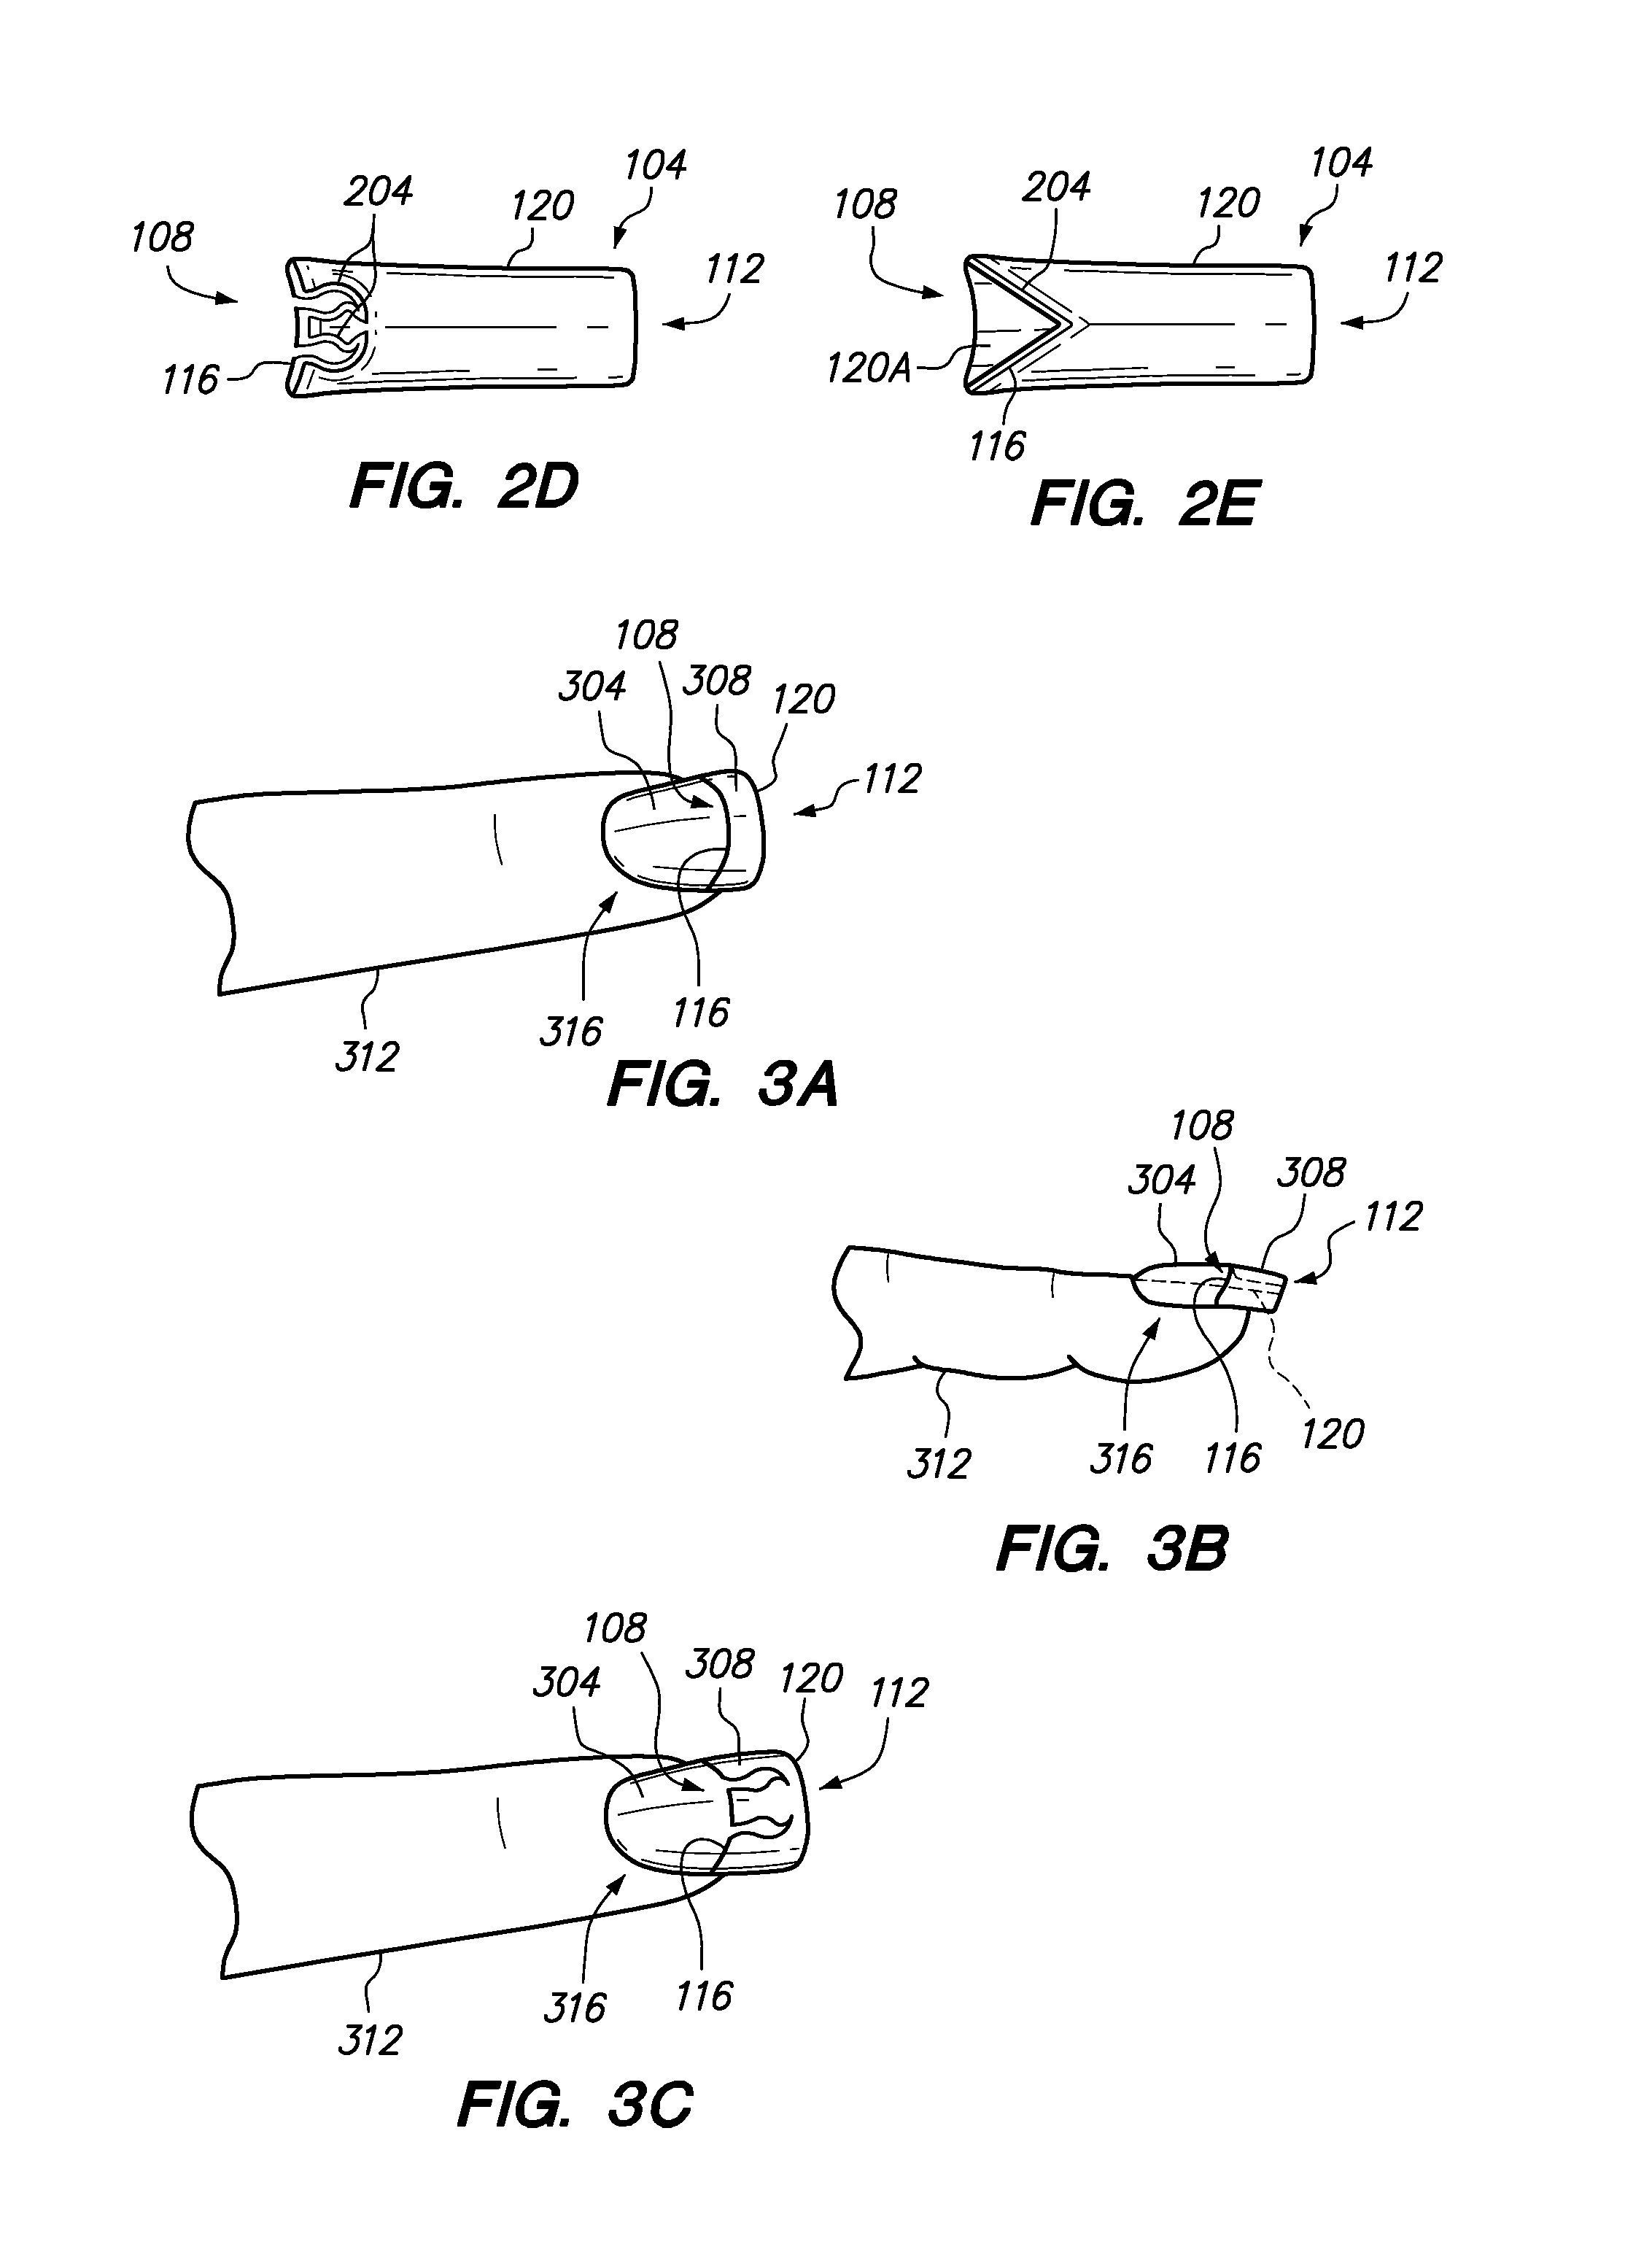 Delineating nail for nail treatment applications and method therefor